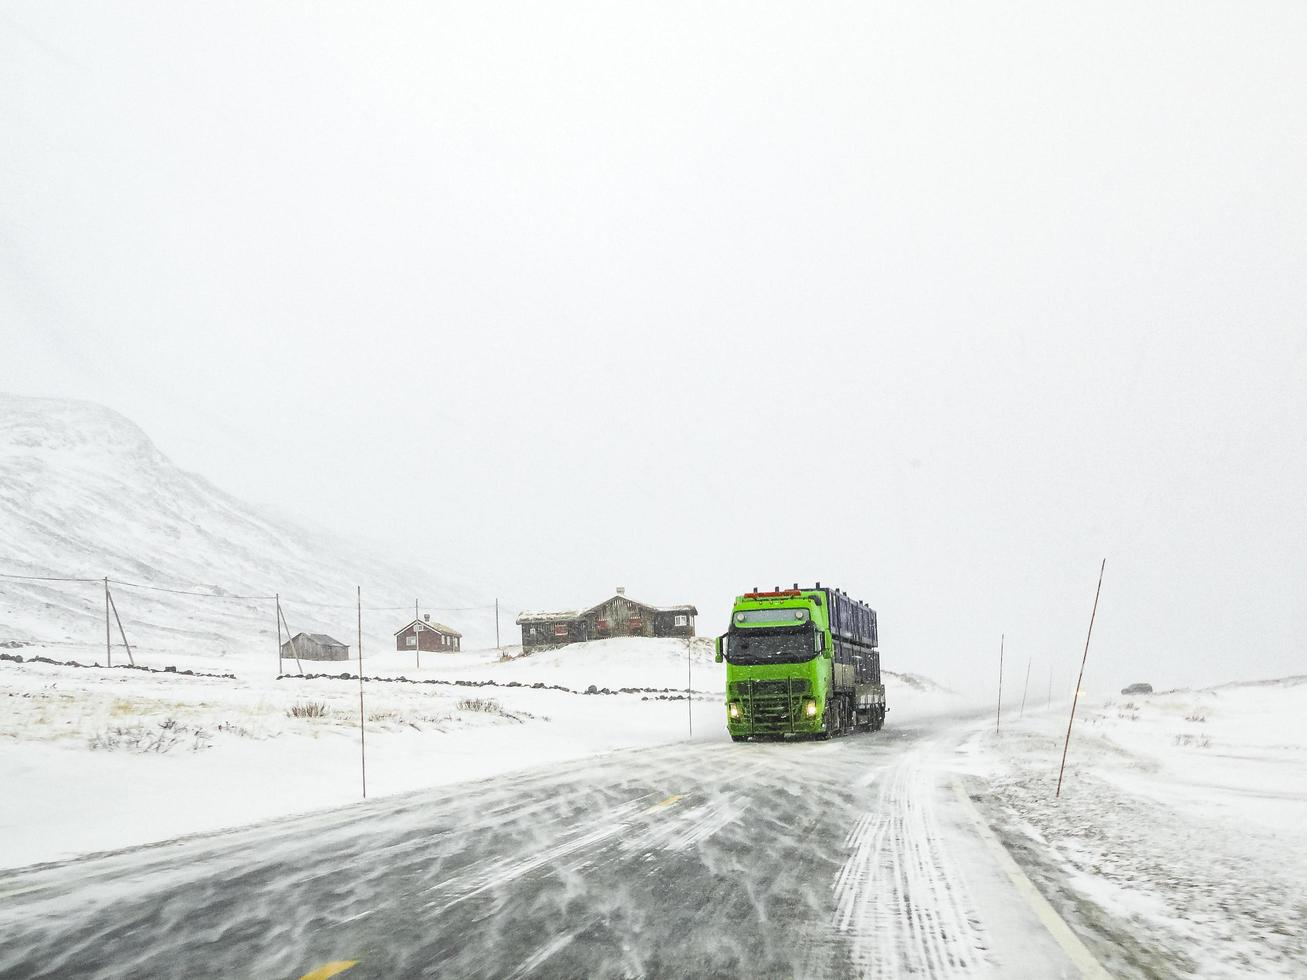 Driving through snowy road landscape, Norway. Green truck in front. photo